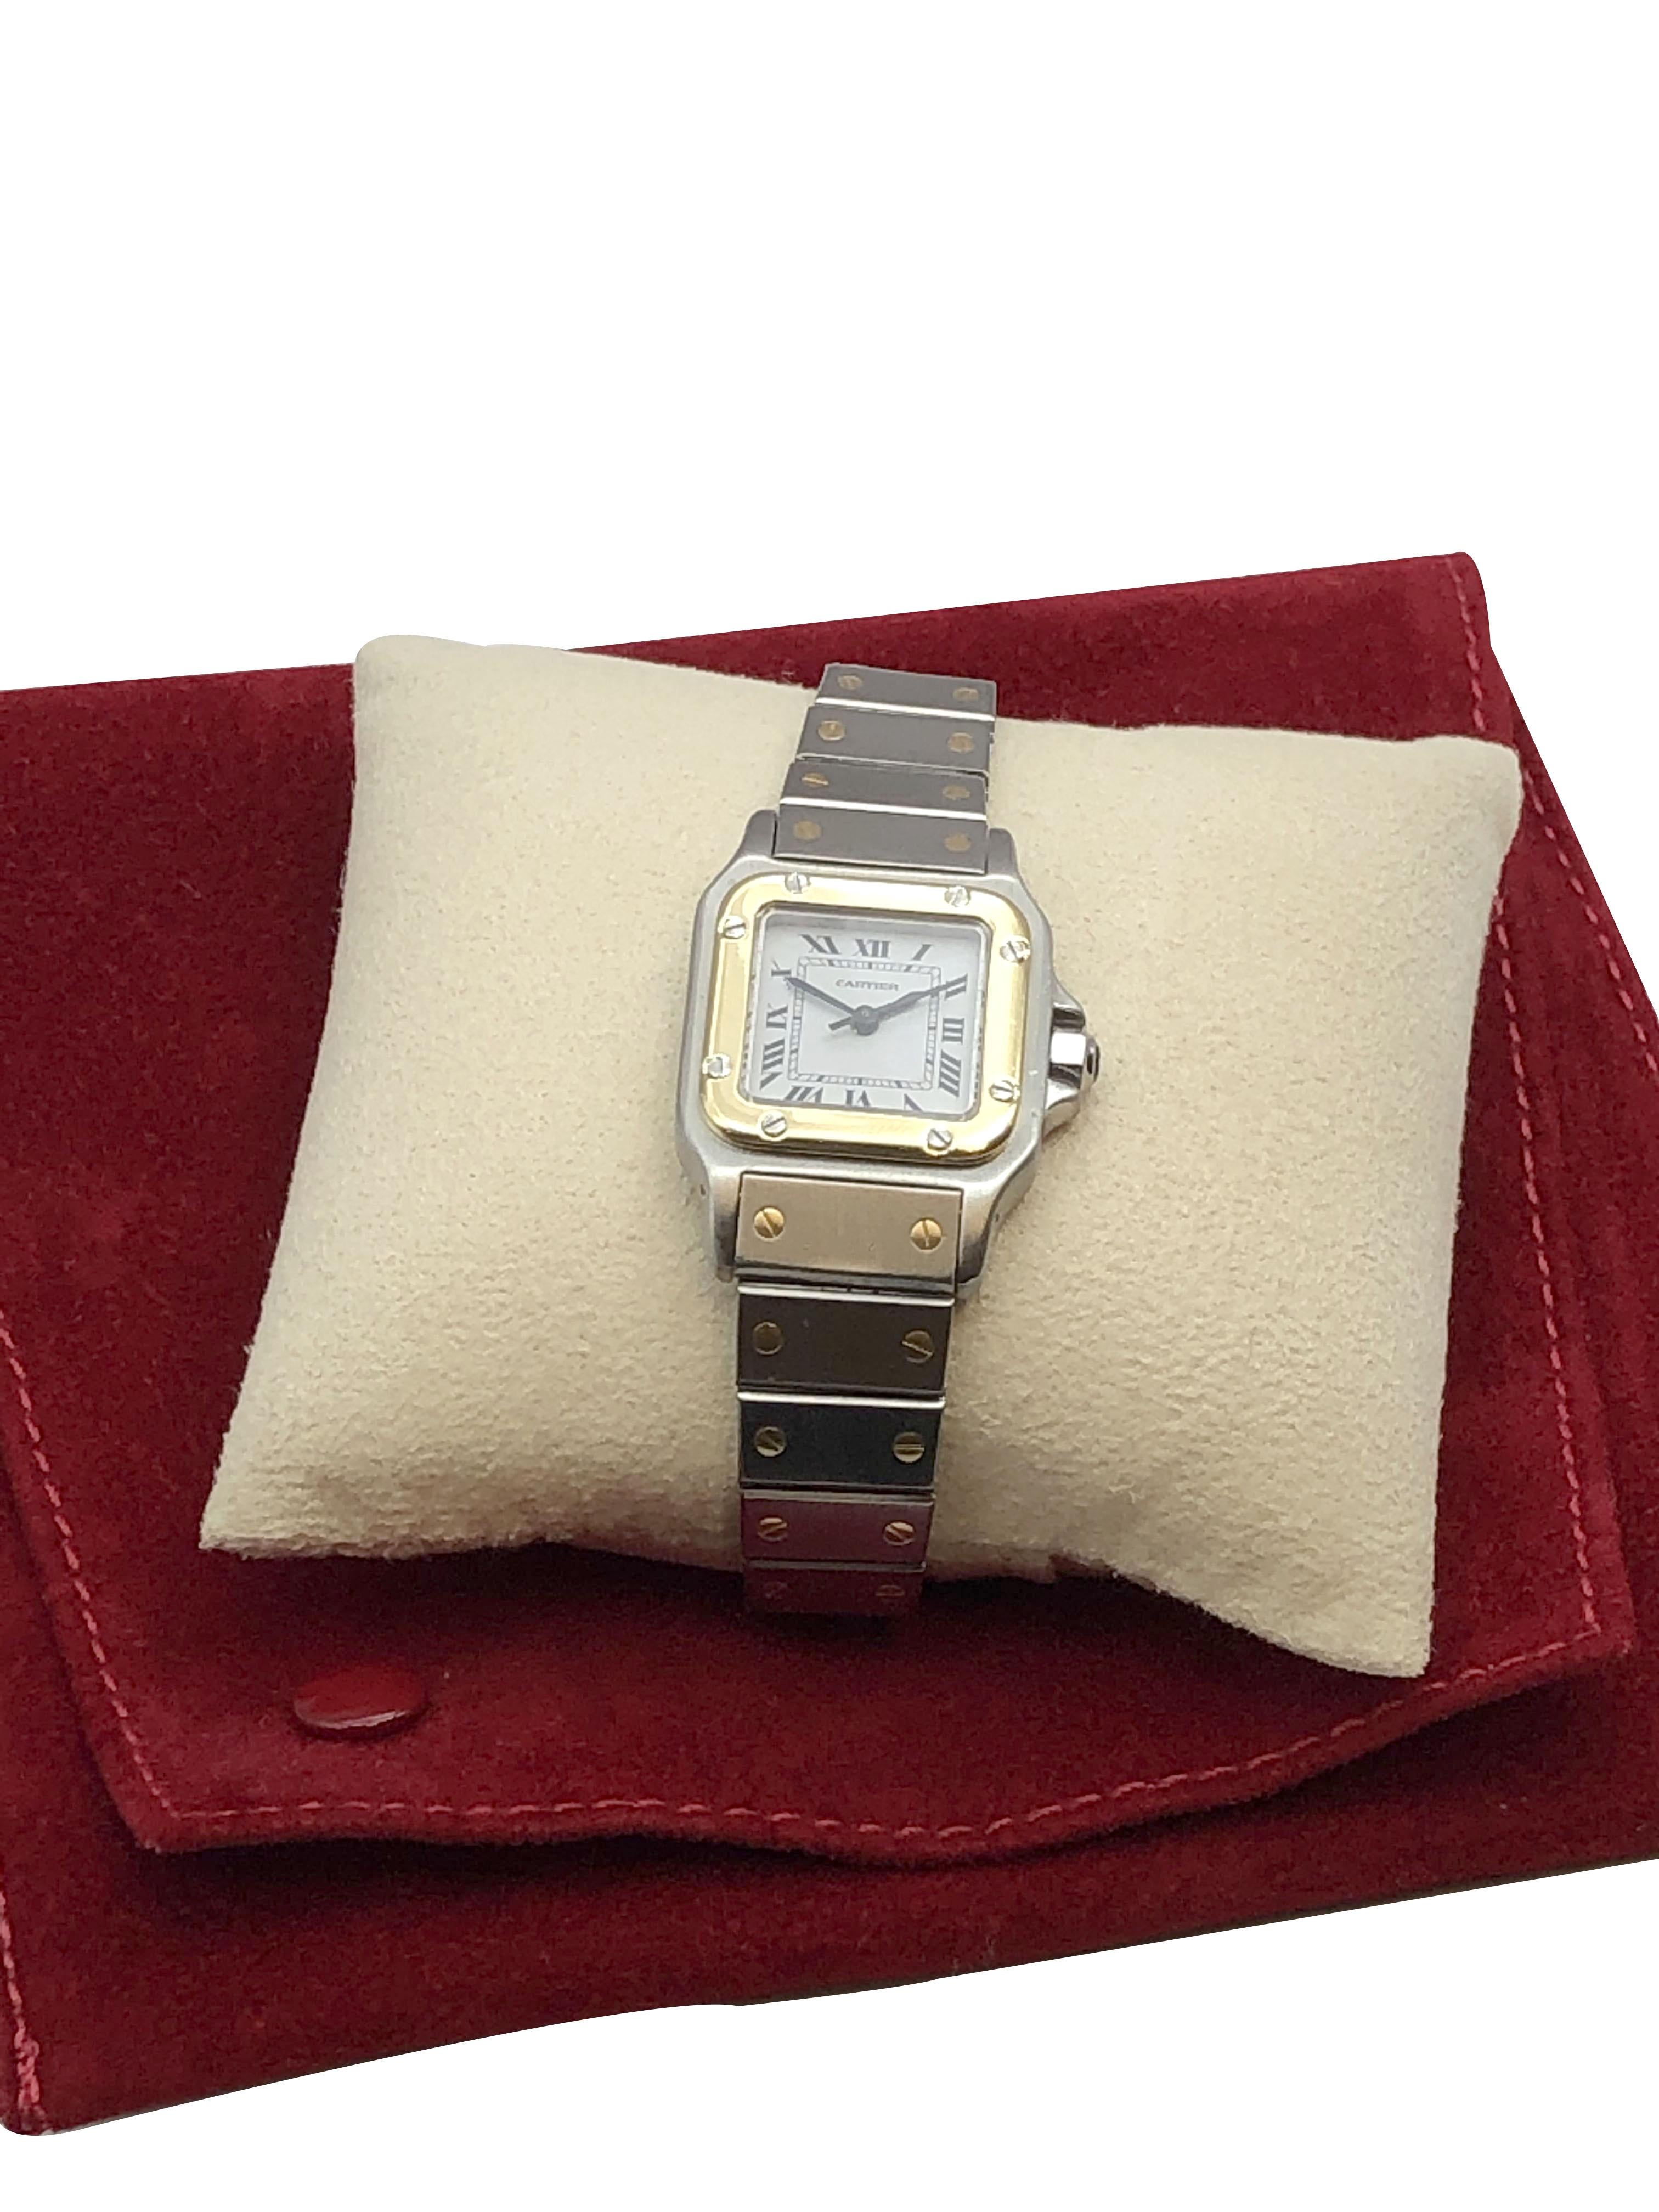 Cartier Santos Ladies Stainless Steel and 18K Gold Self Winding Wrist Watch 1